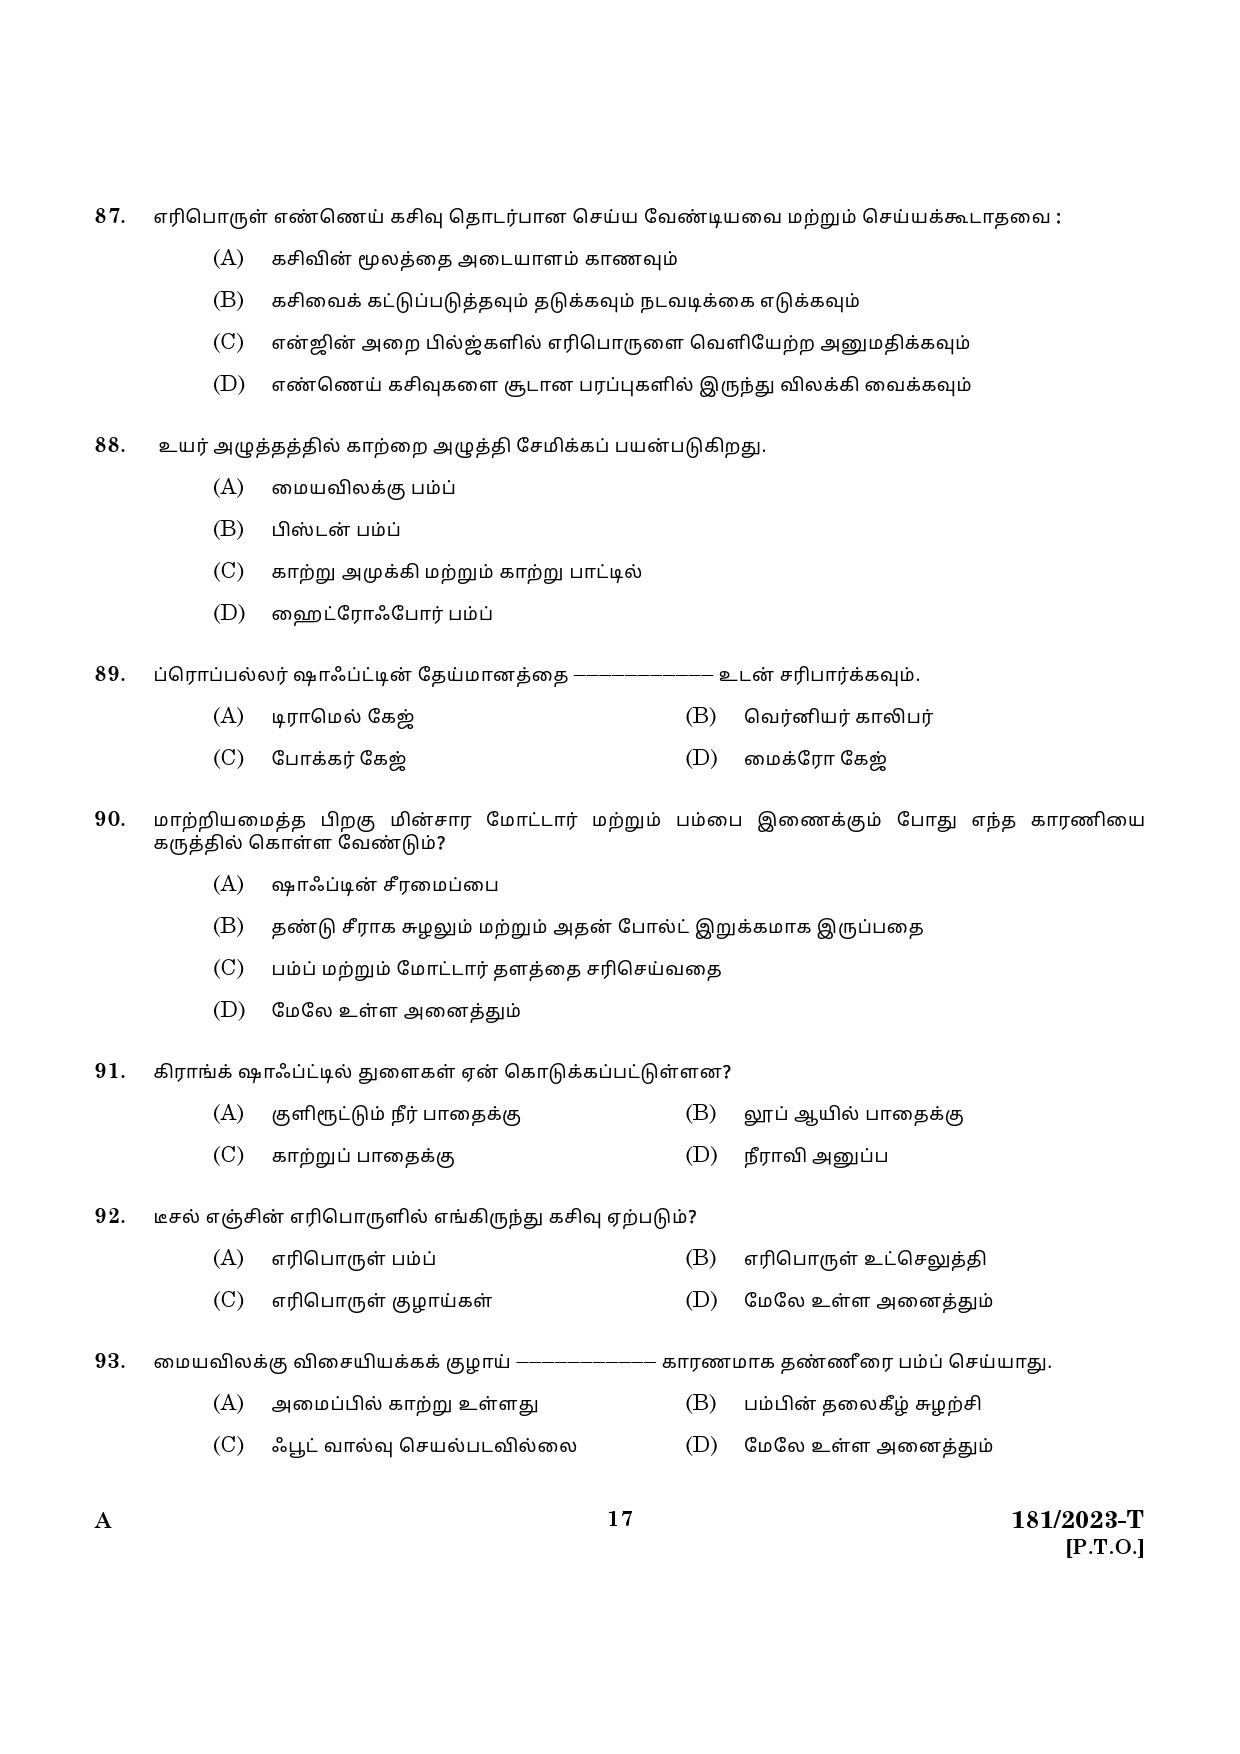 KPSC Forest Boat Driver Tamil Exam 2023 Code 1812023 T 15